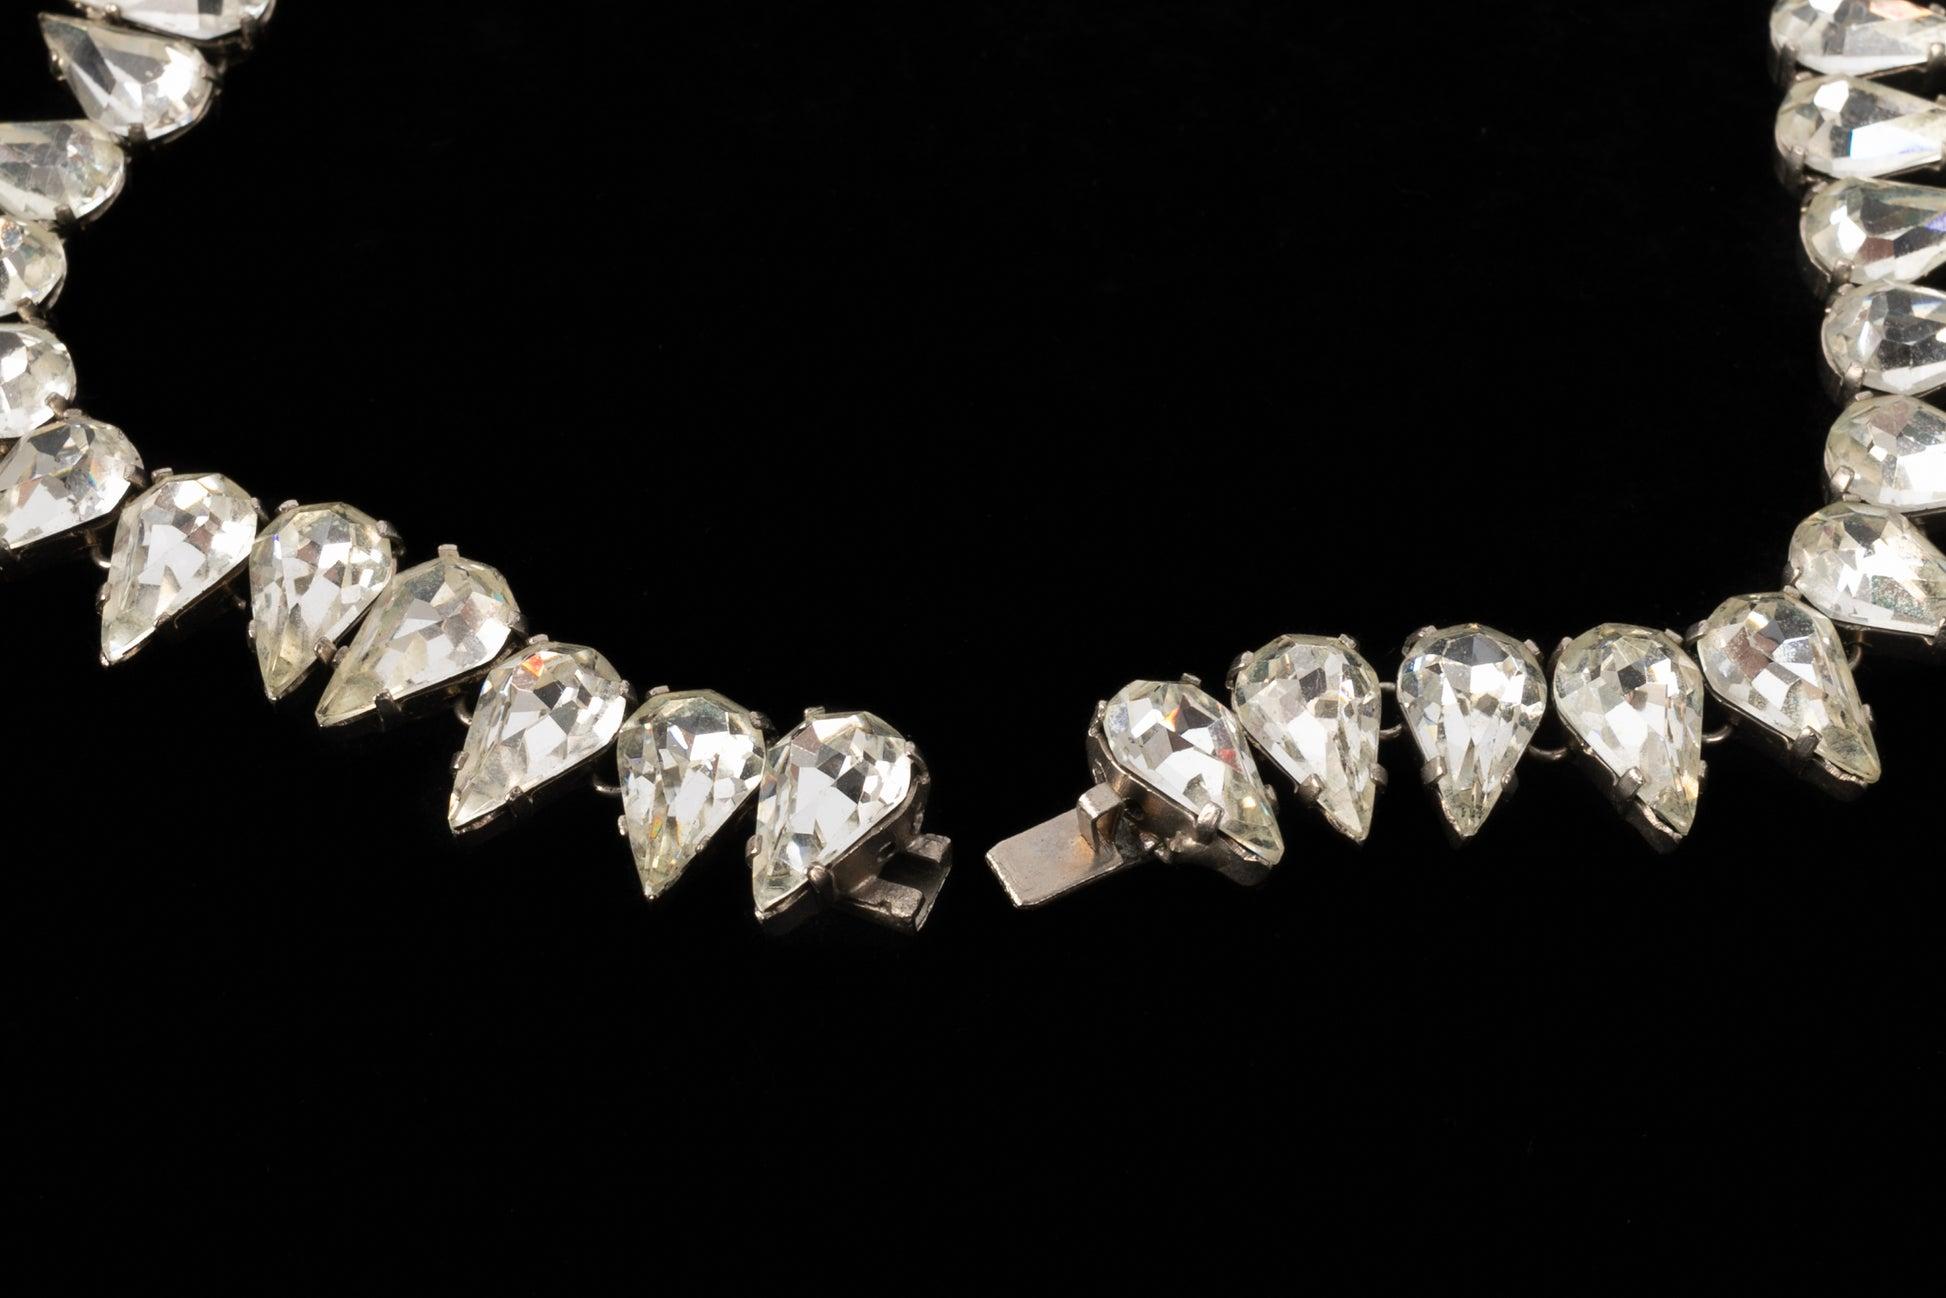 Viintage Rhinestoned Necklace with Rhinestones For Sale 2